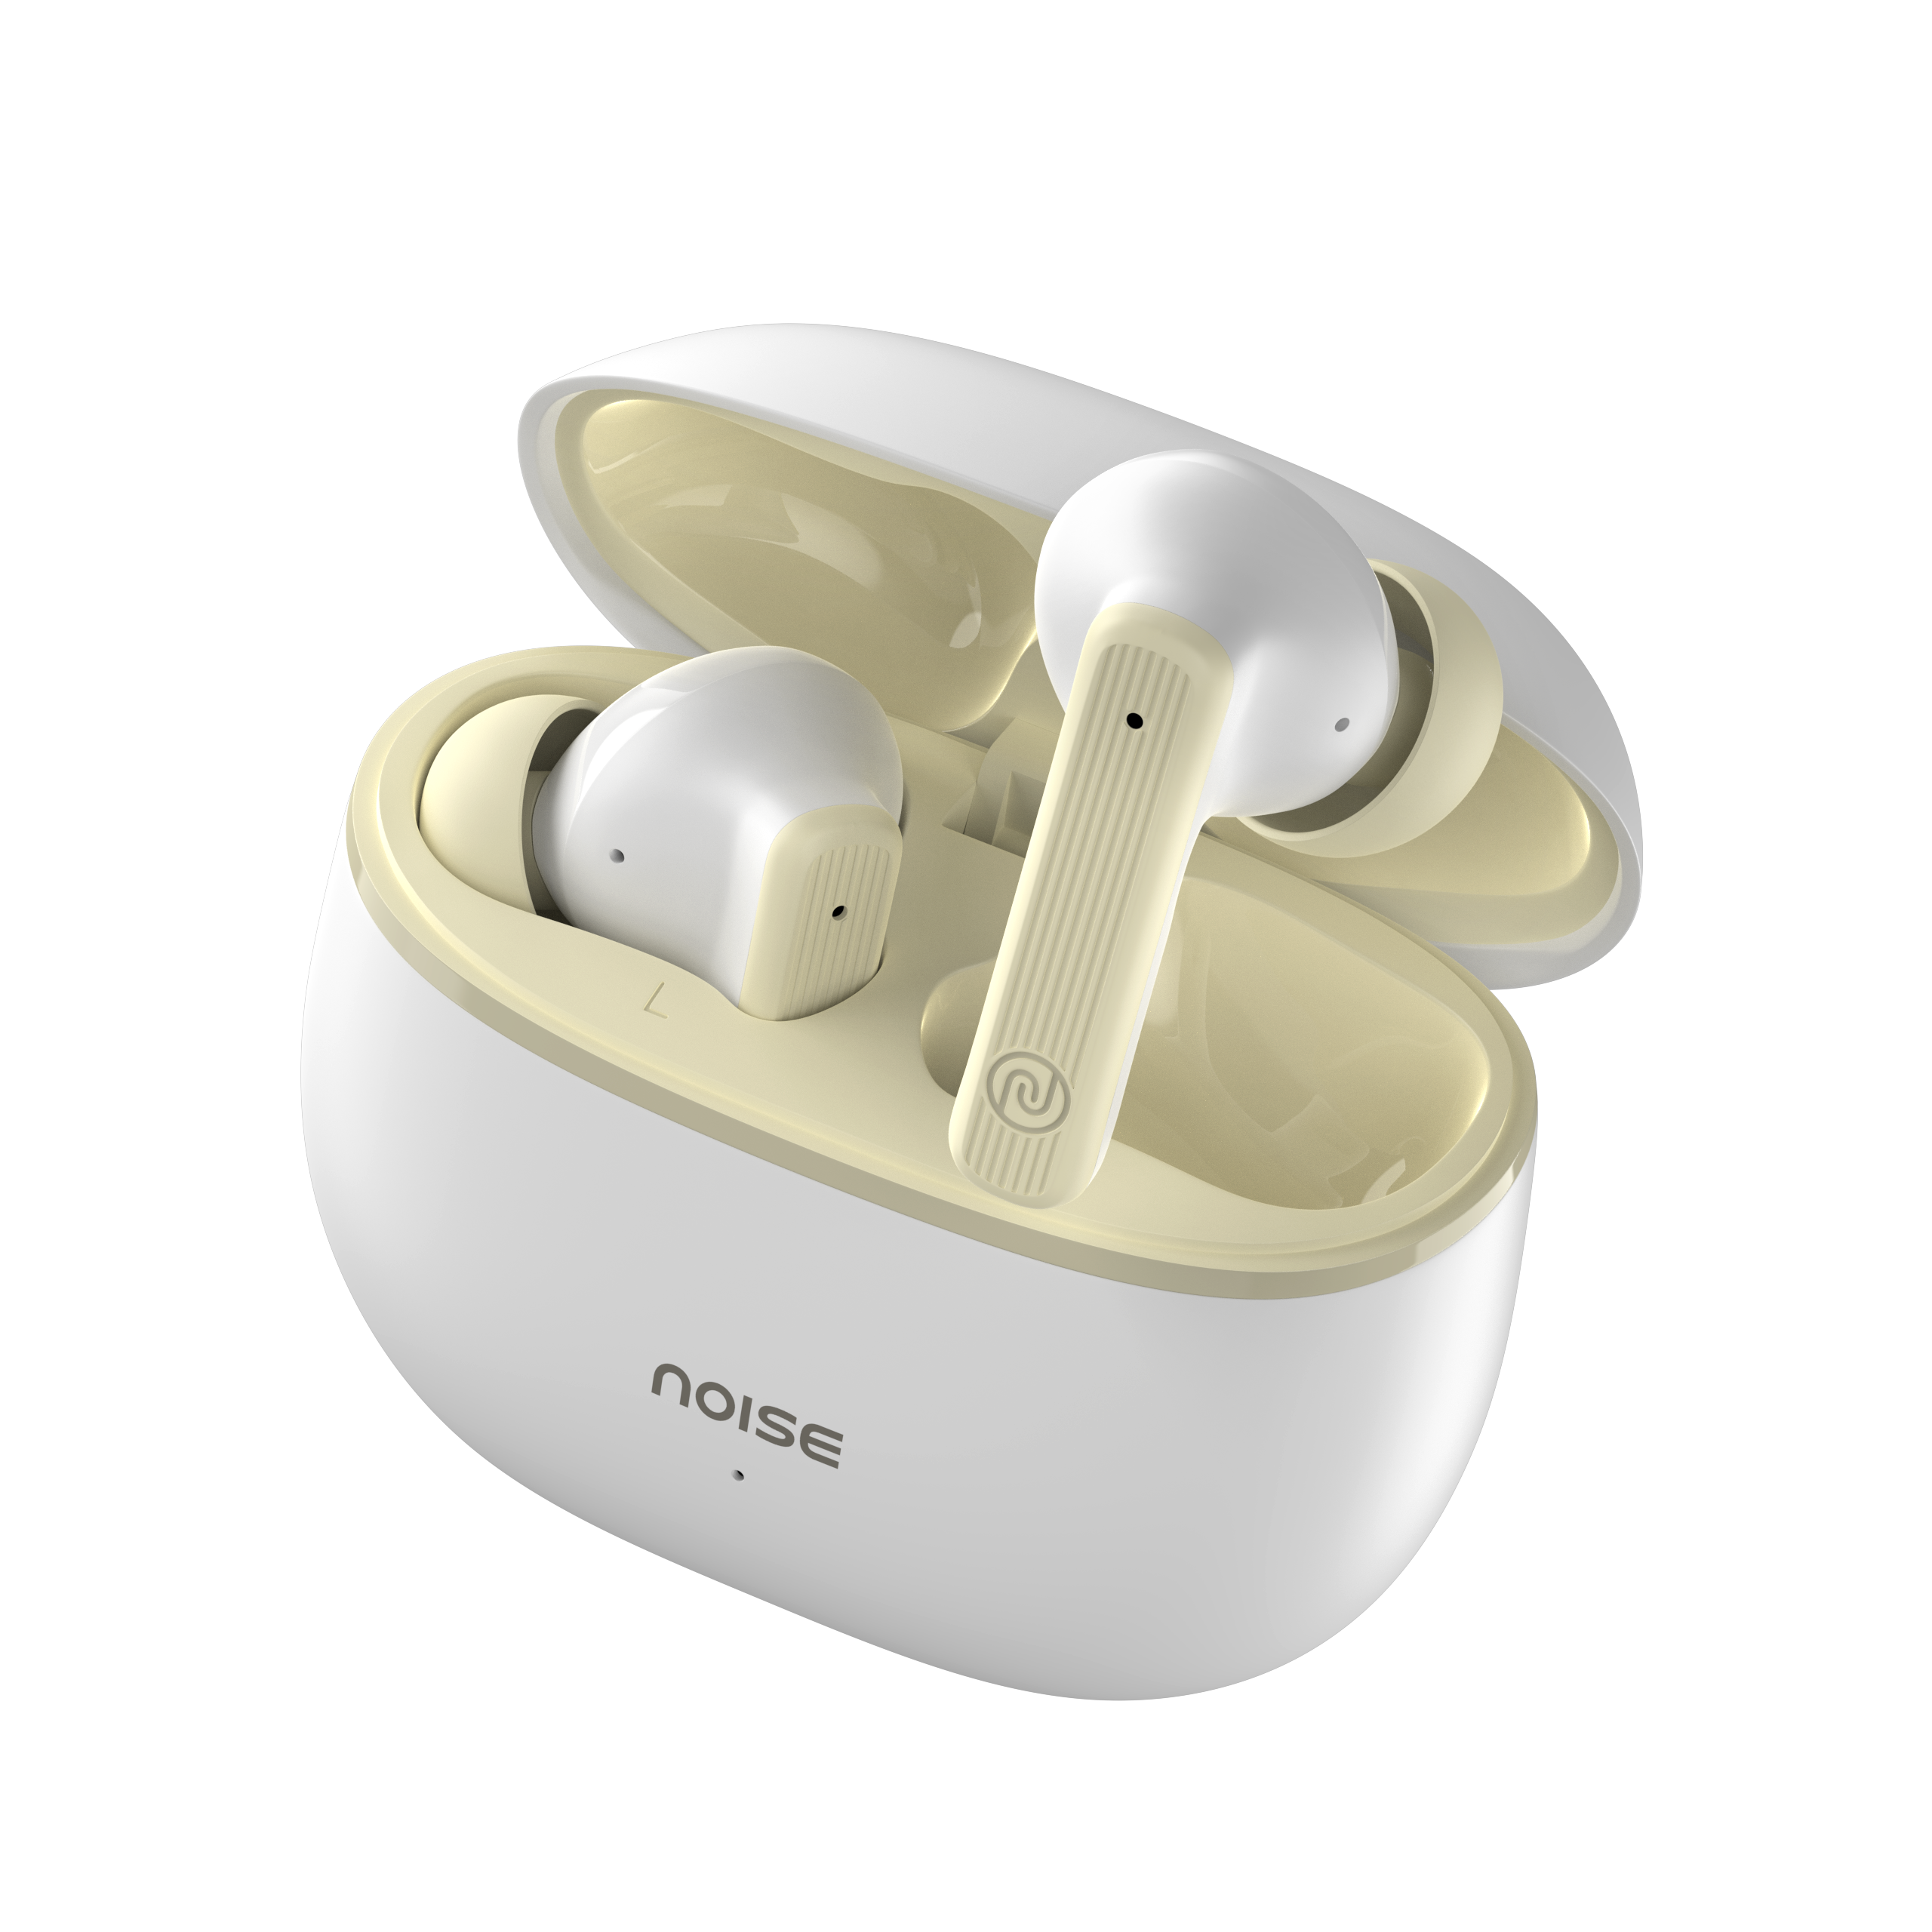 Noise Air Buds Pro 3 Earbuds